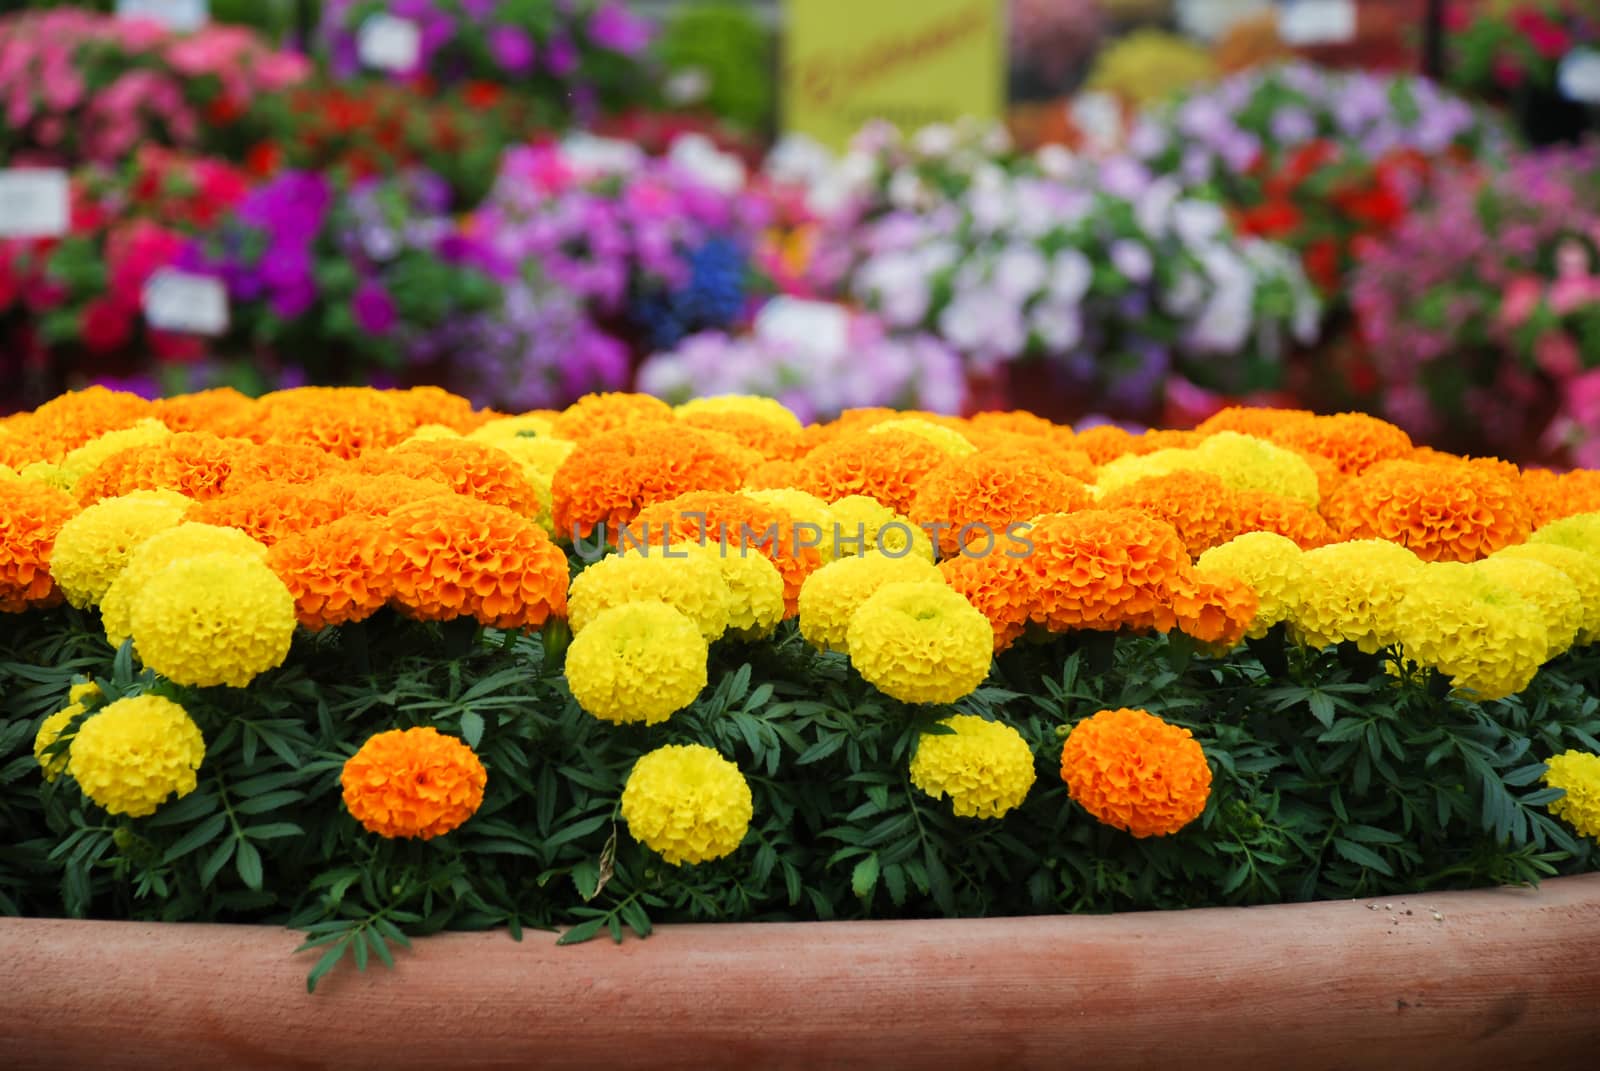 Marigolds Mixed Color (Tagetes erecta, Mexican marigold) by yuiyuize